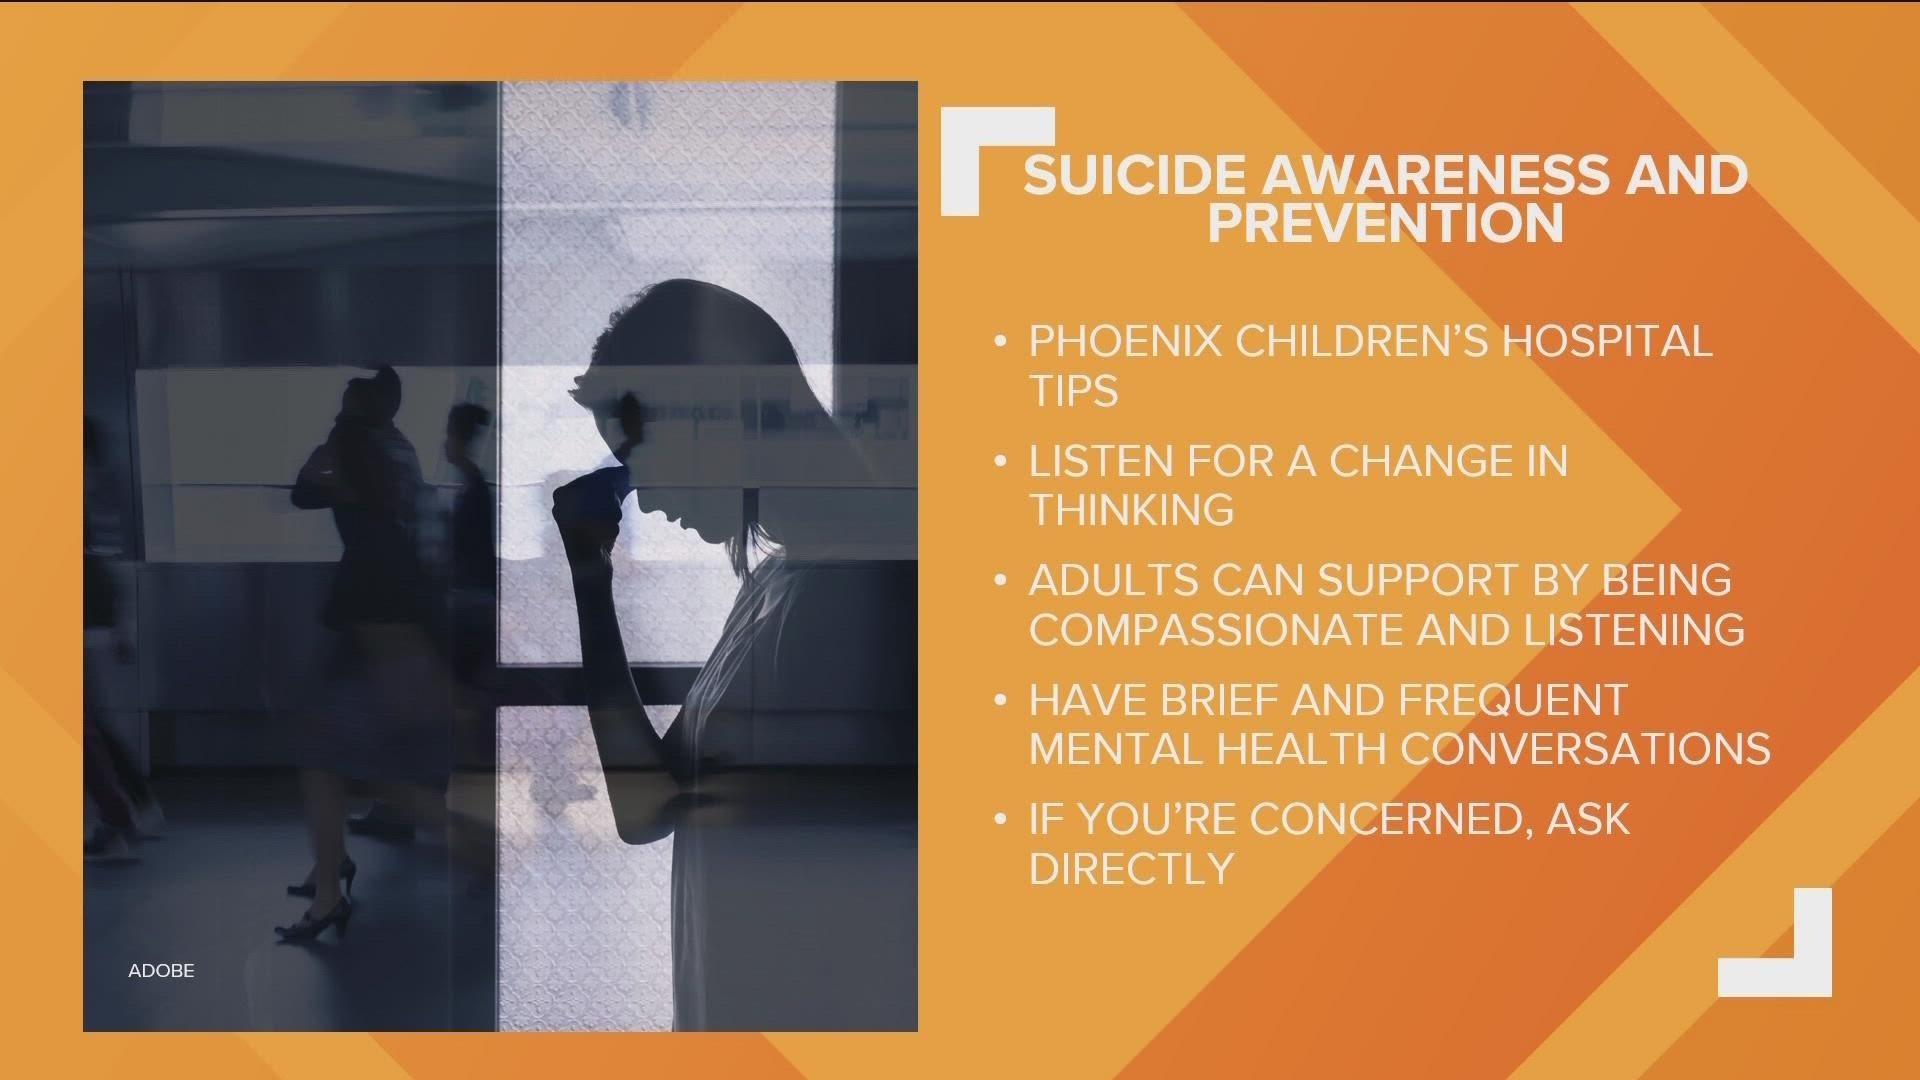 More parents are seeking help with their children's mental health, PCH officials said. Here's are some tips for suicide prevention and awareness for families.